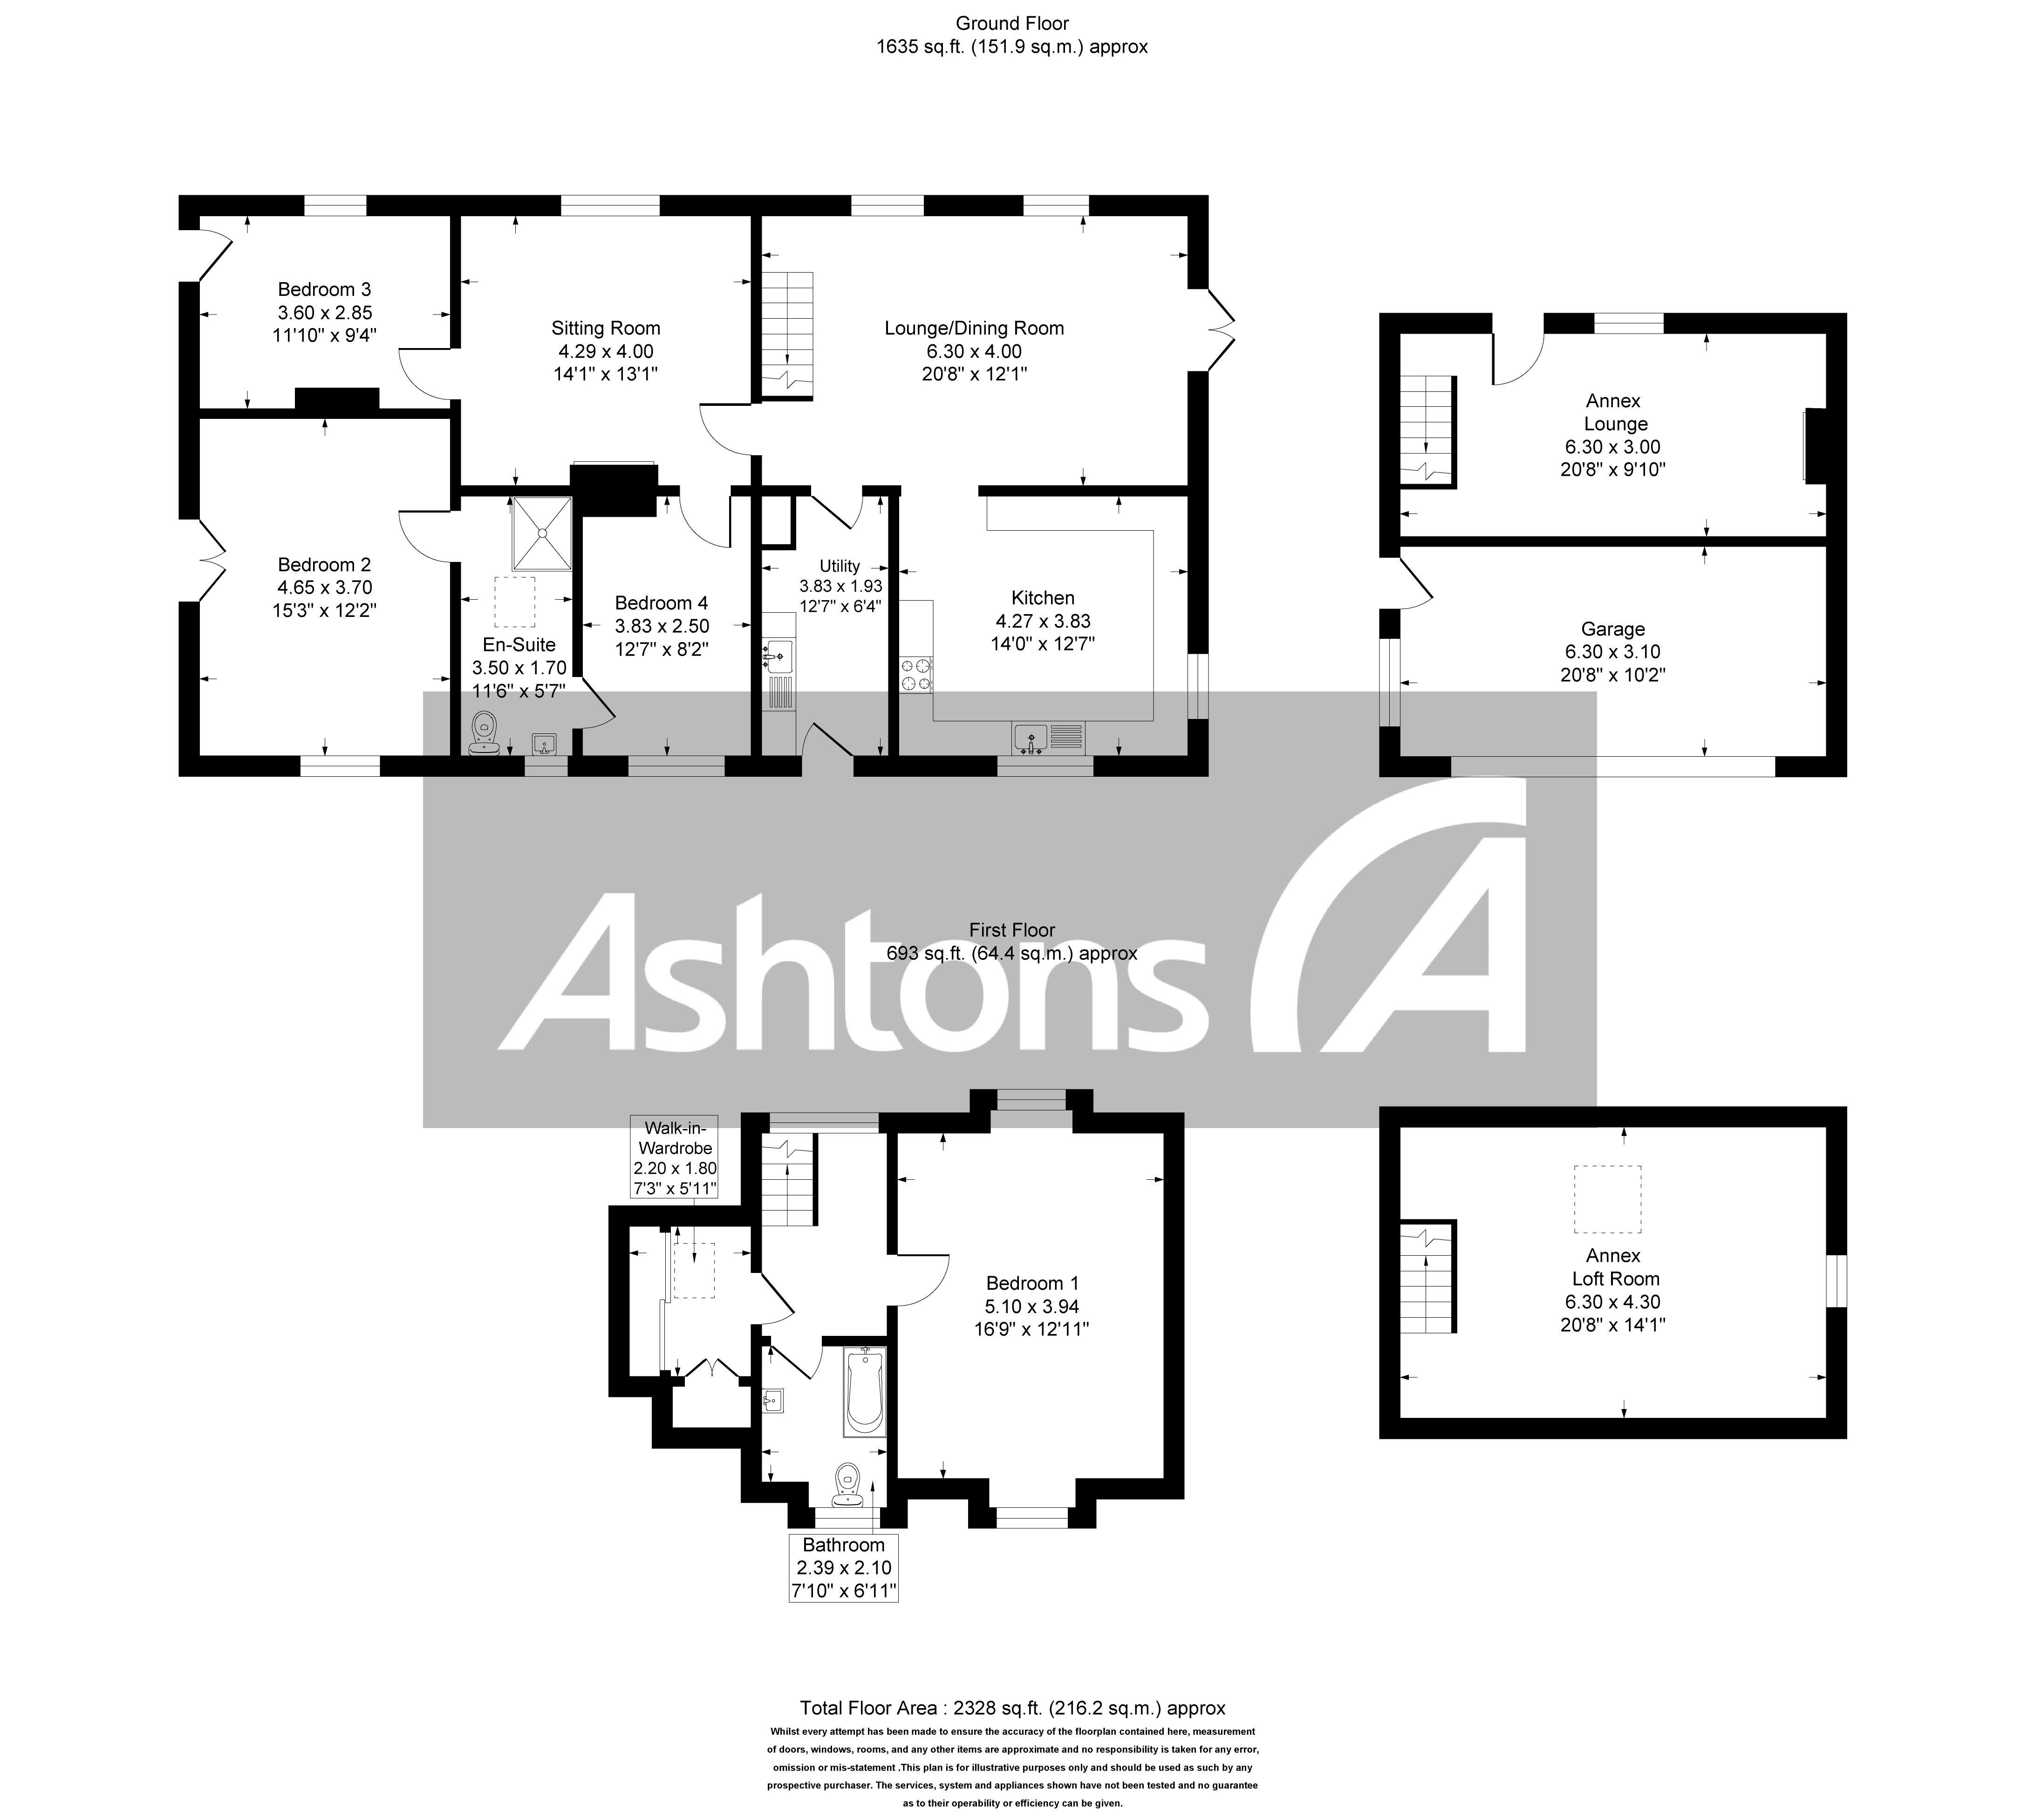 Keepers Cottage Pex Hill, Widnes Floor Plan